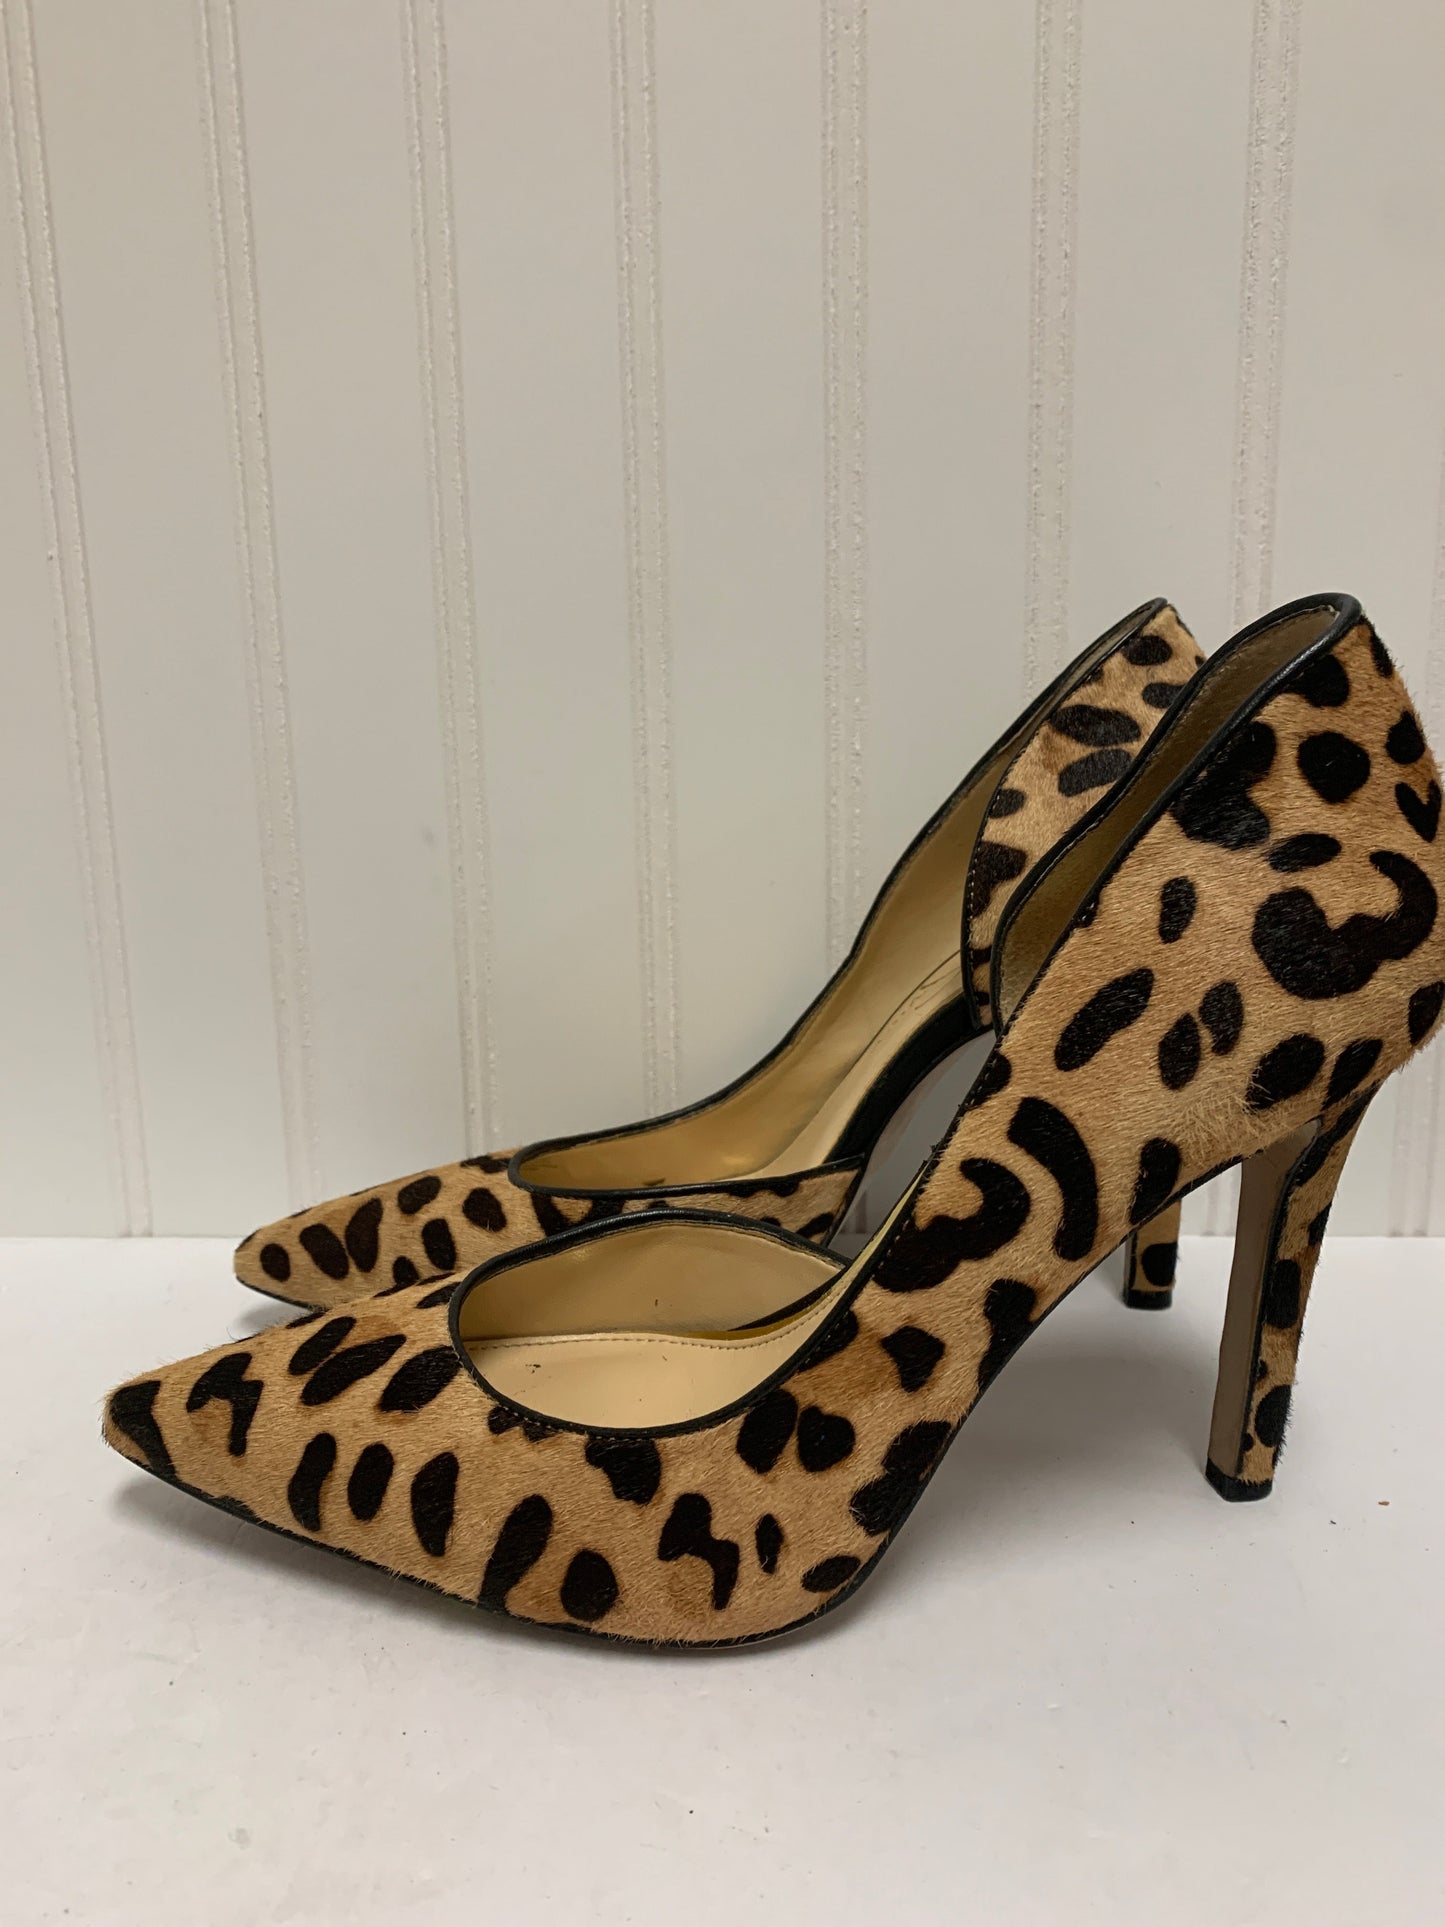 Shoes Heels Stiletto By Jessica Simpson  Size: 9